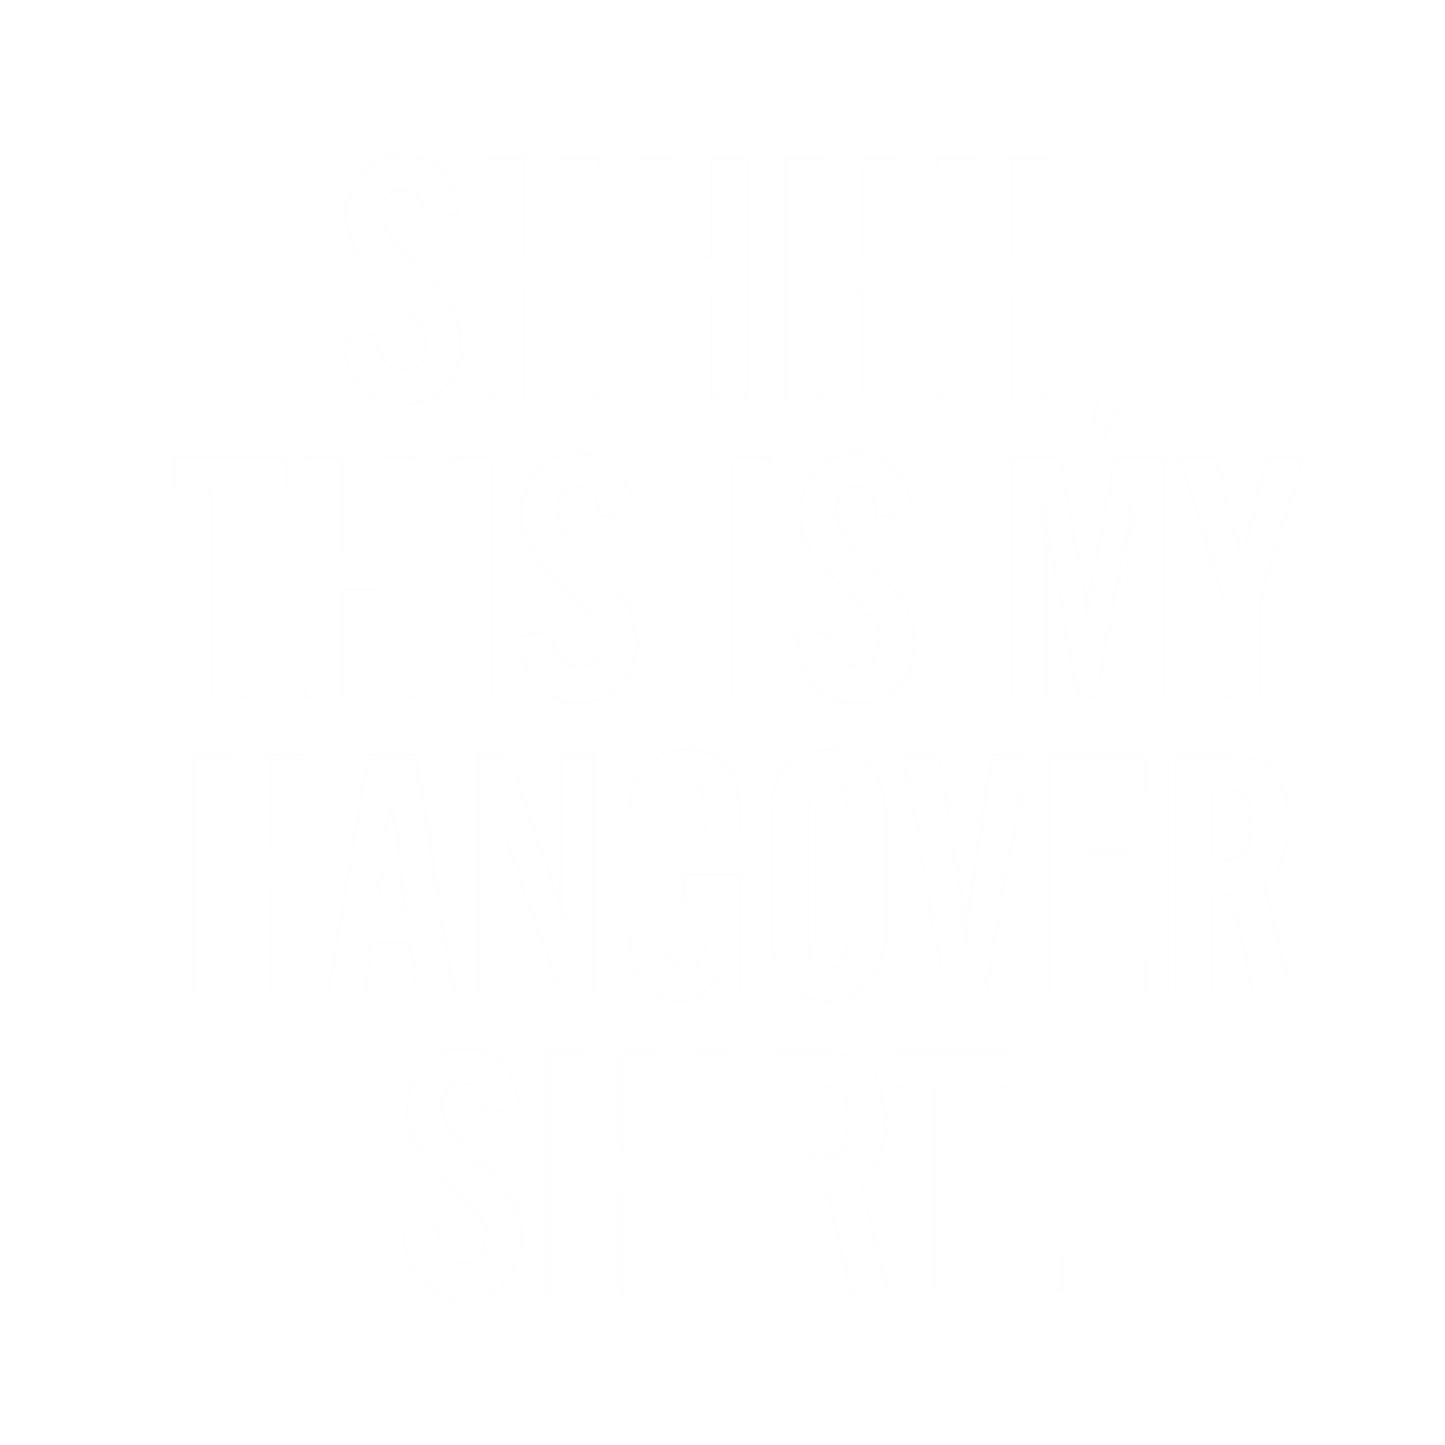 SHHHH, This Is My Hangover Shirt. New